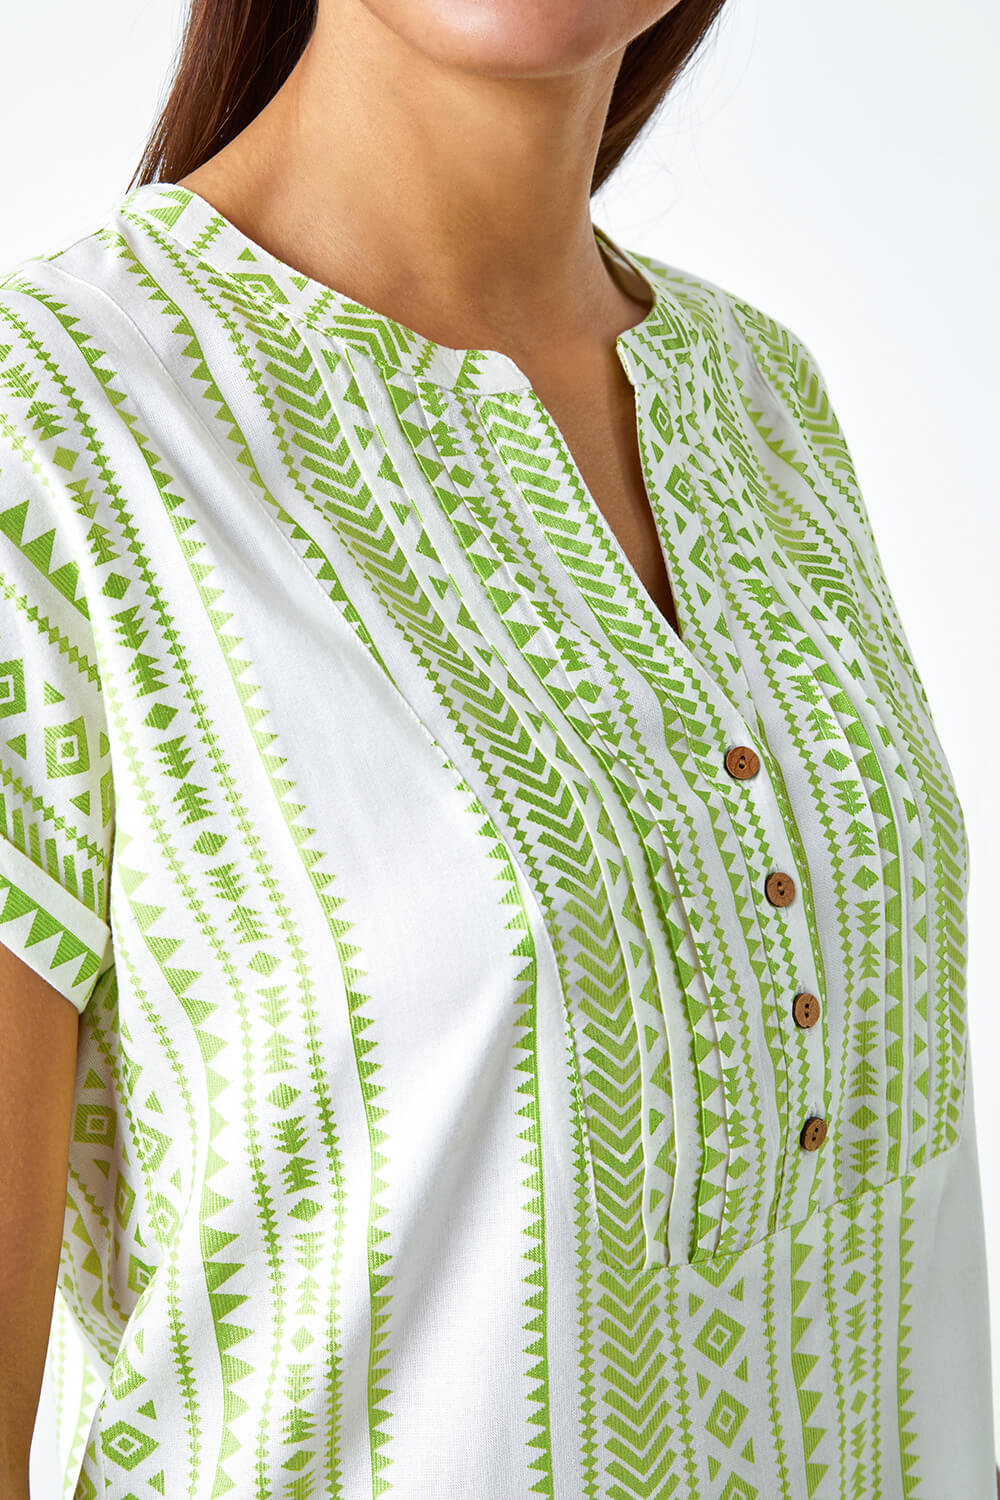 Lime Aztec Print Button Detail Top, Image 5 of 5